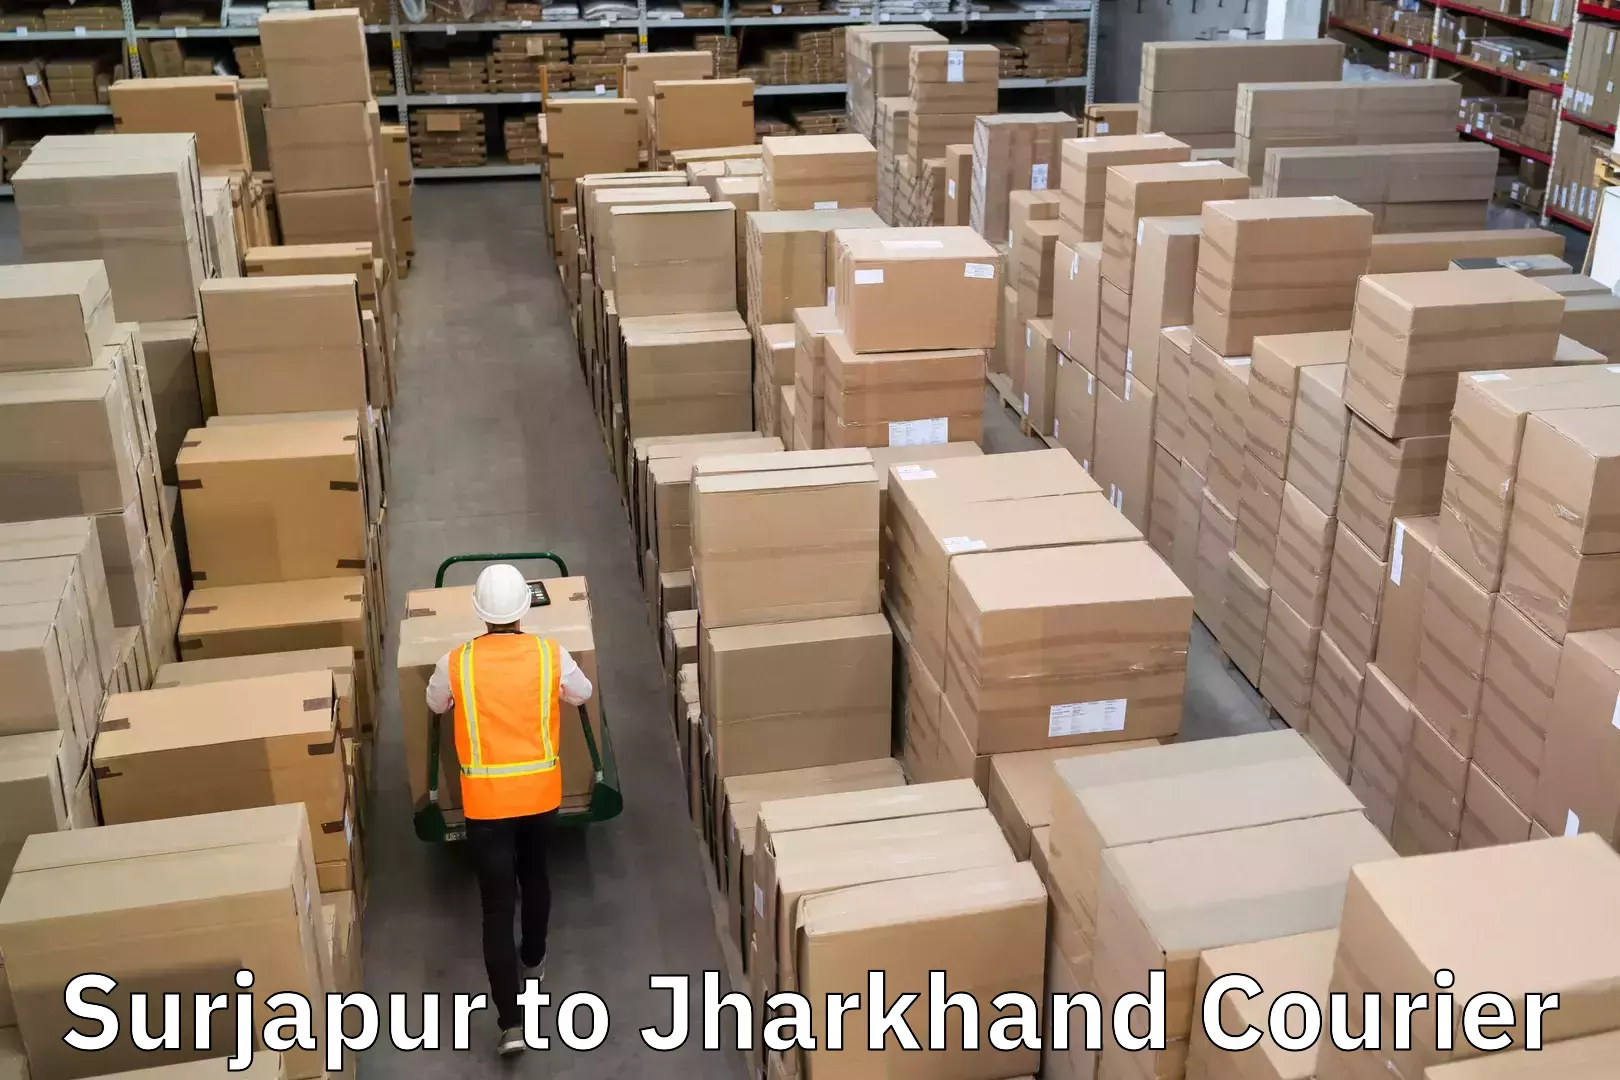 Express delivery network Surjapur to Jharkhand